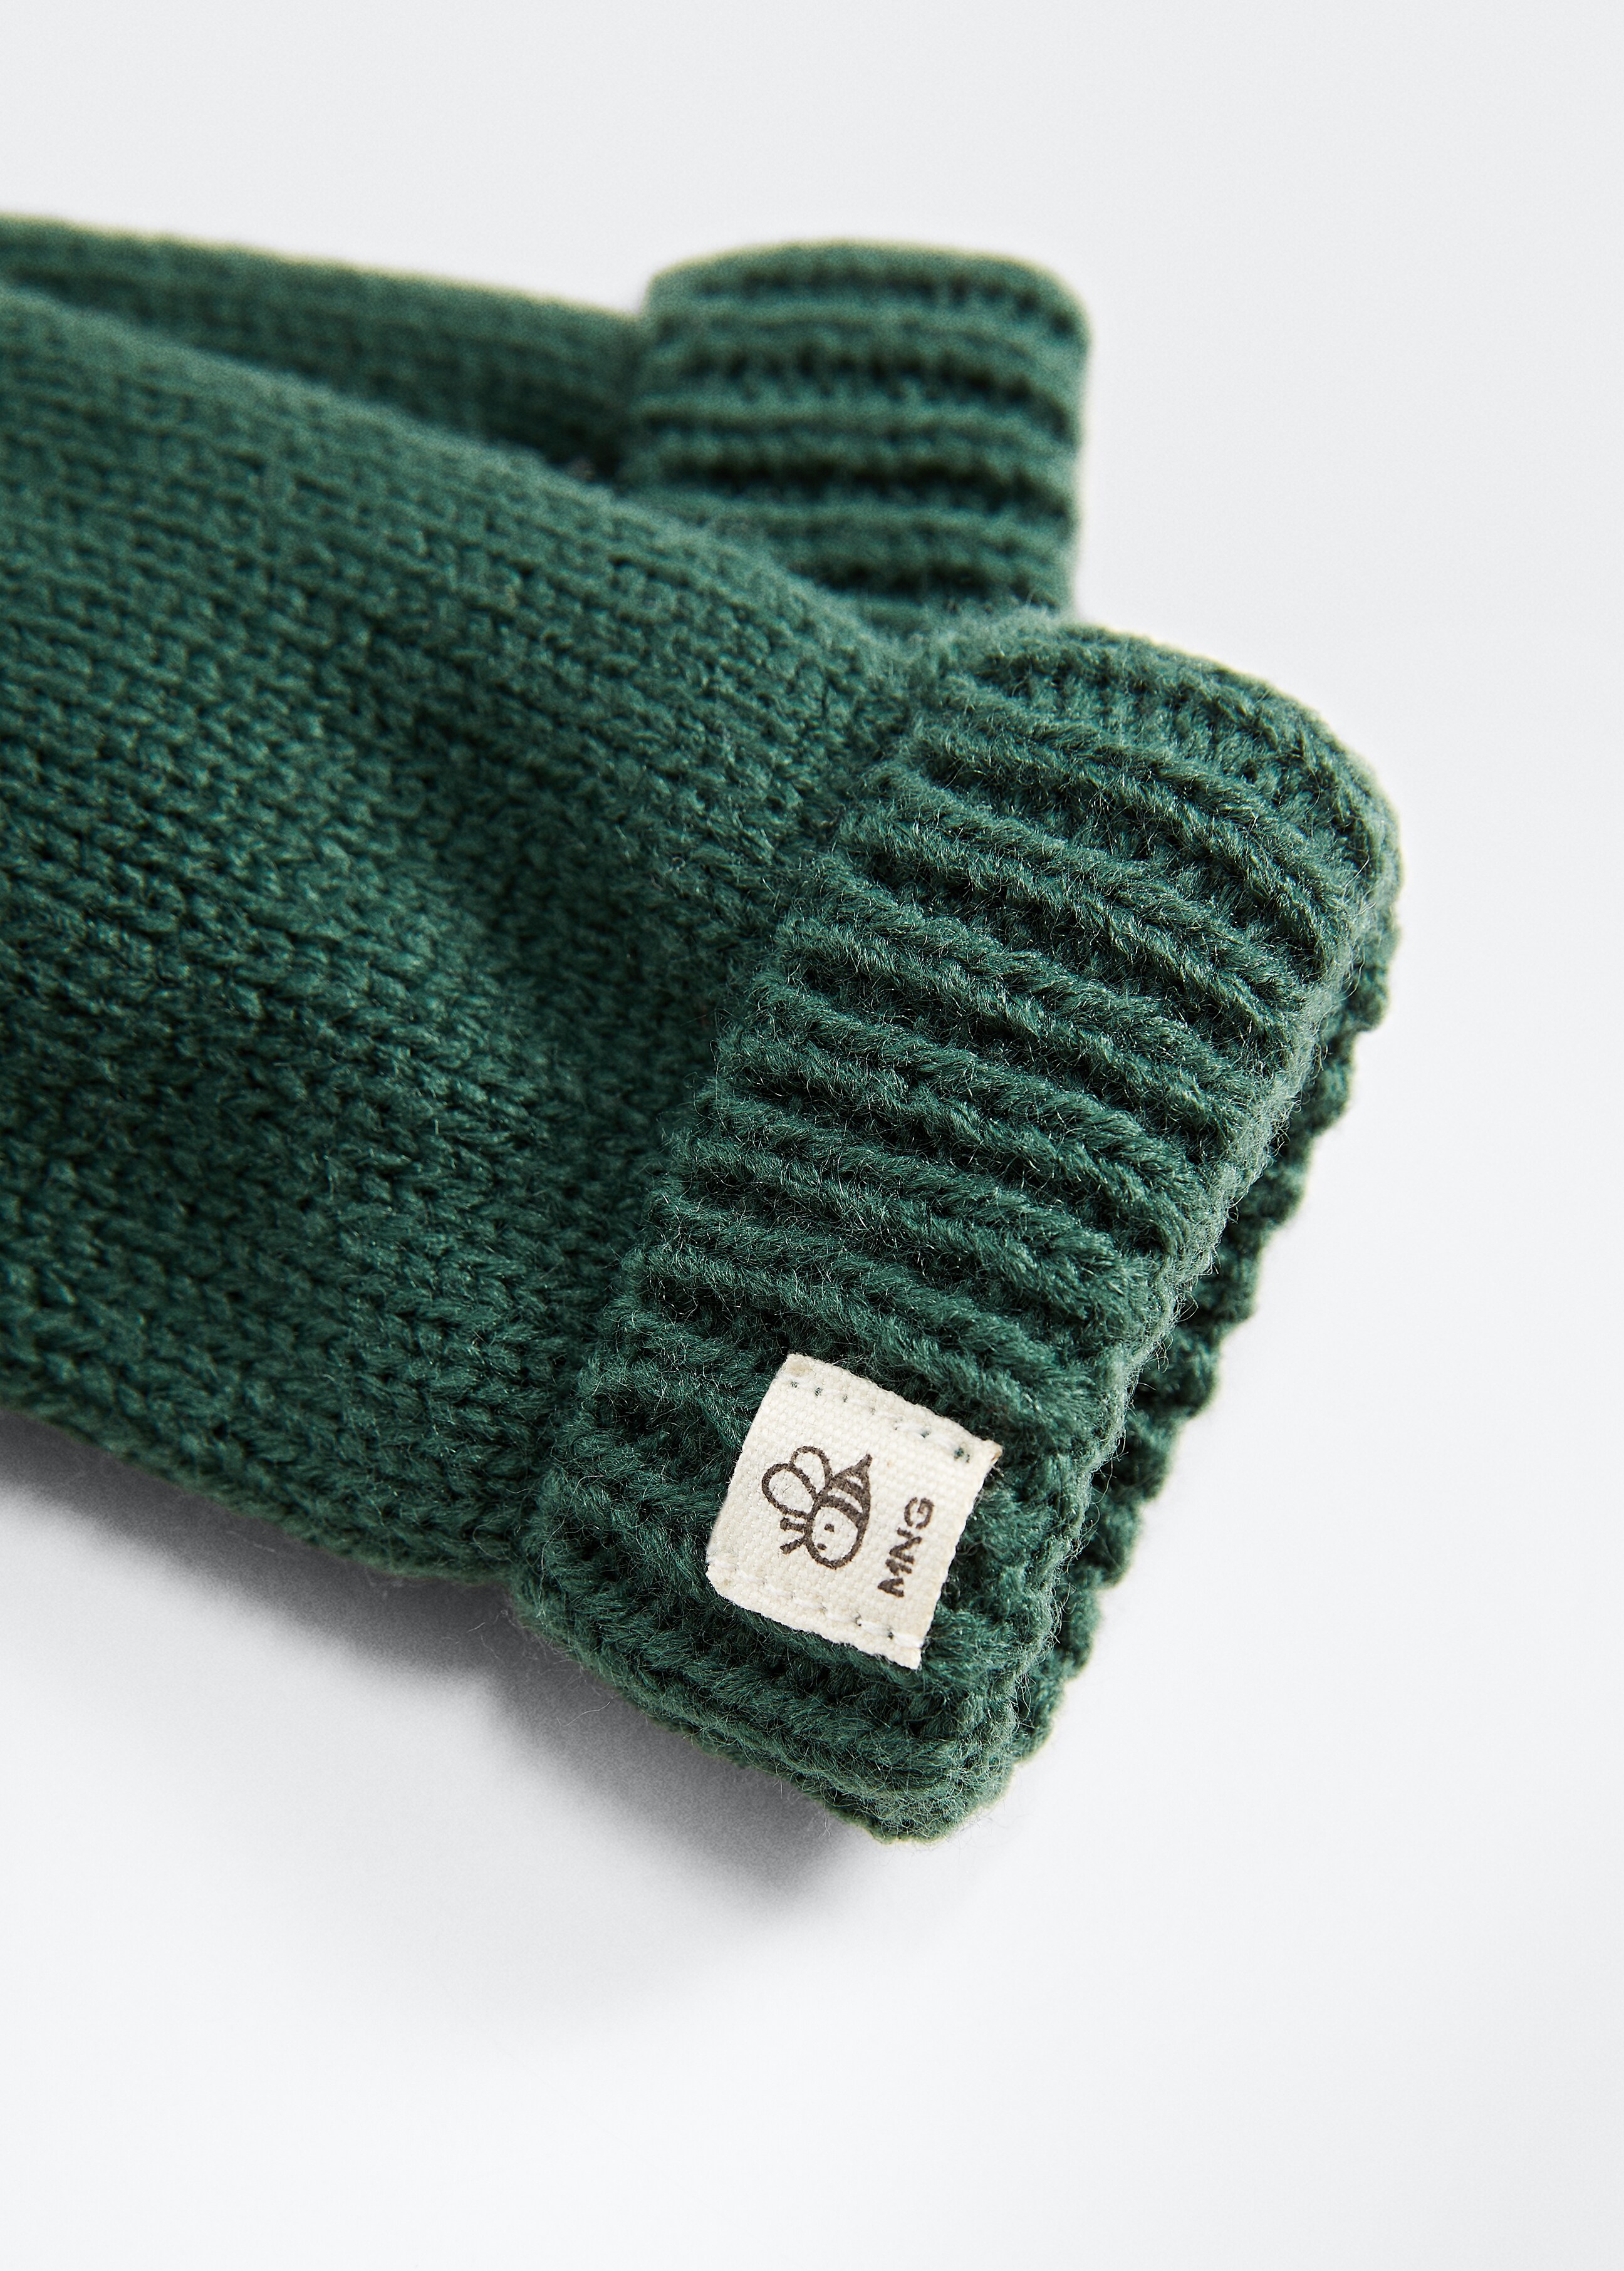 Knit gloves - Details of the article 4